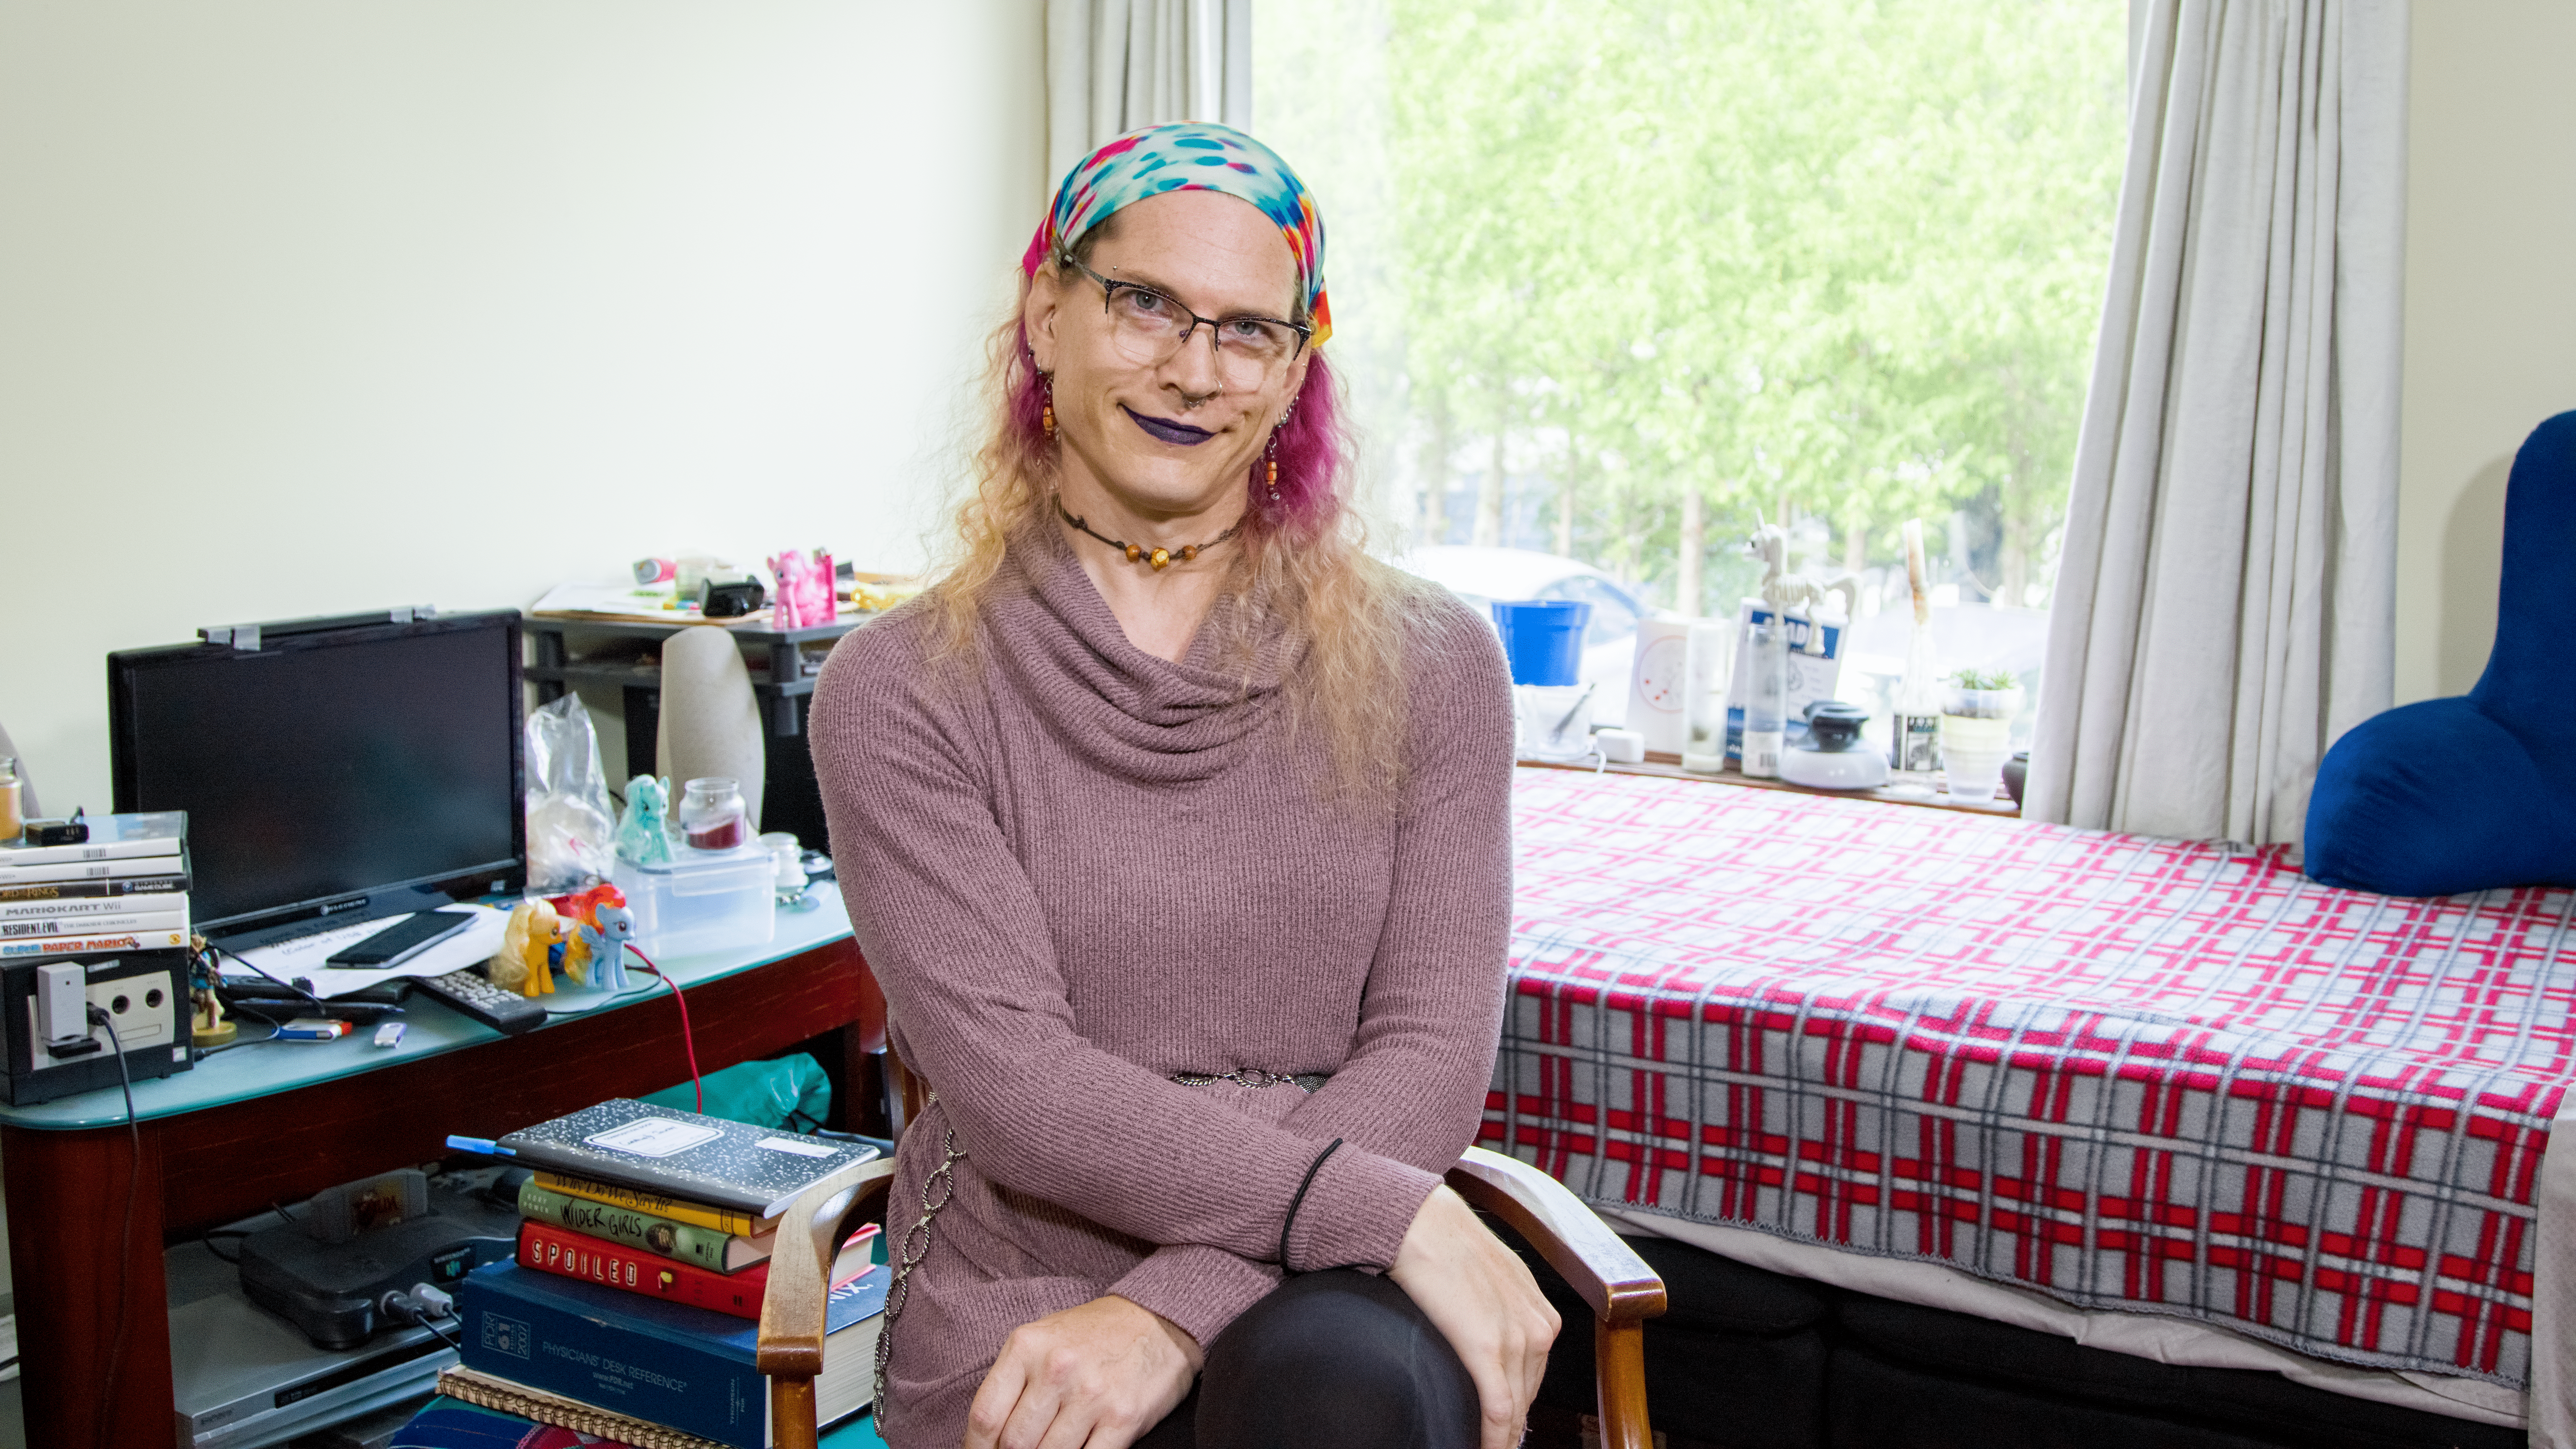 After Hitting Rock Bottom, Trans Person Finds Inspiration in Helping Others. “Not Every Queer Kid Out There Has the Support of Their Families.”